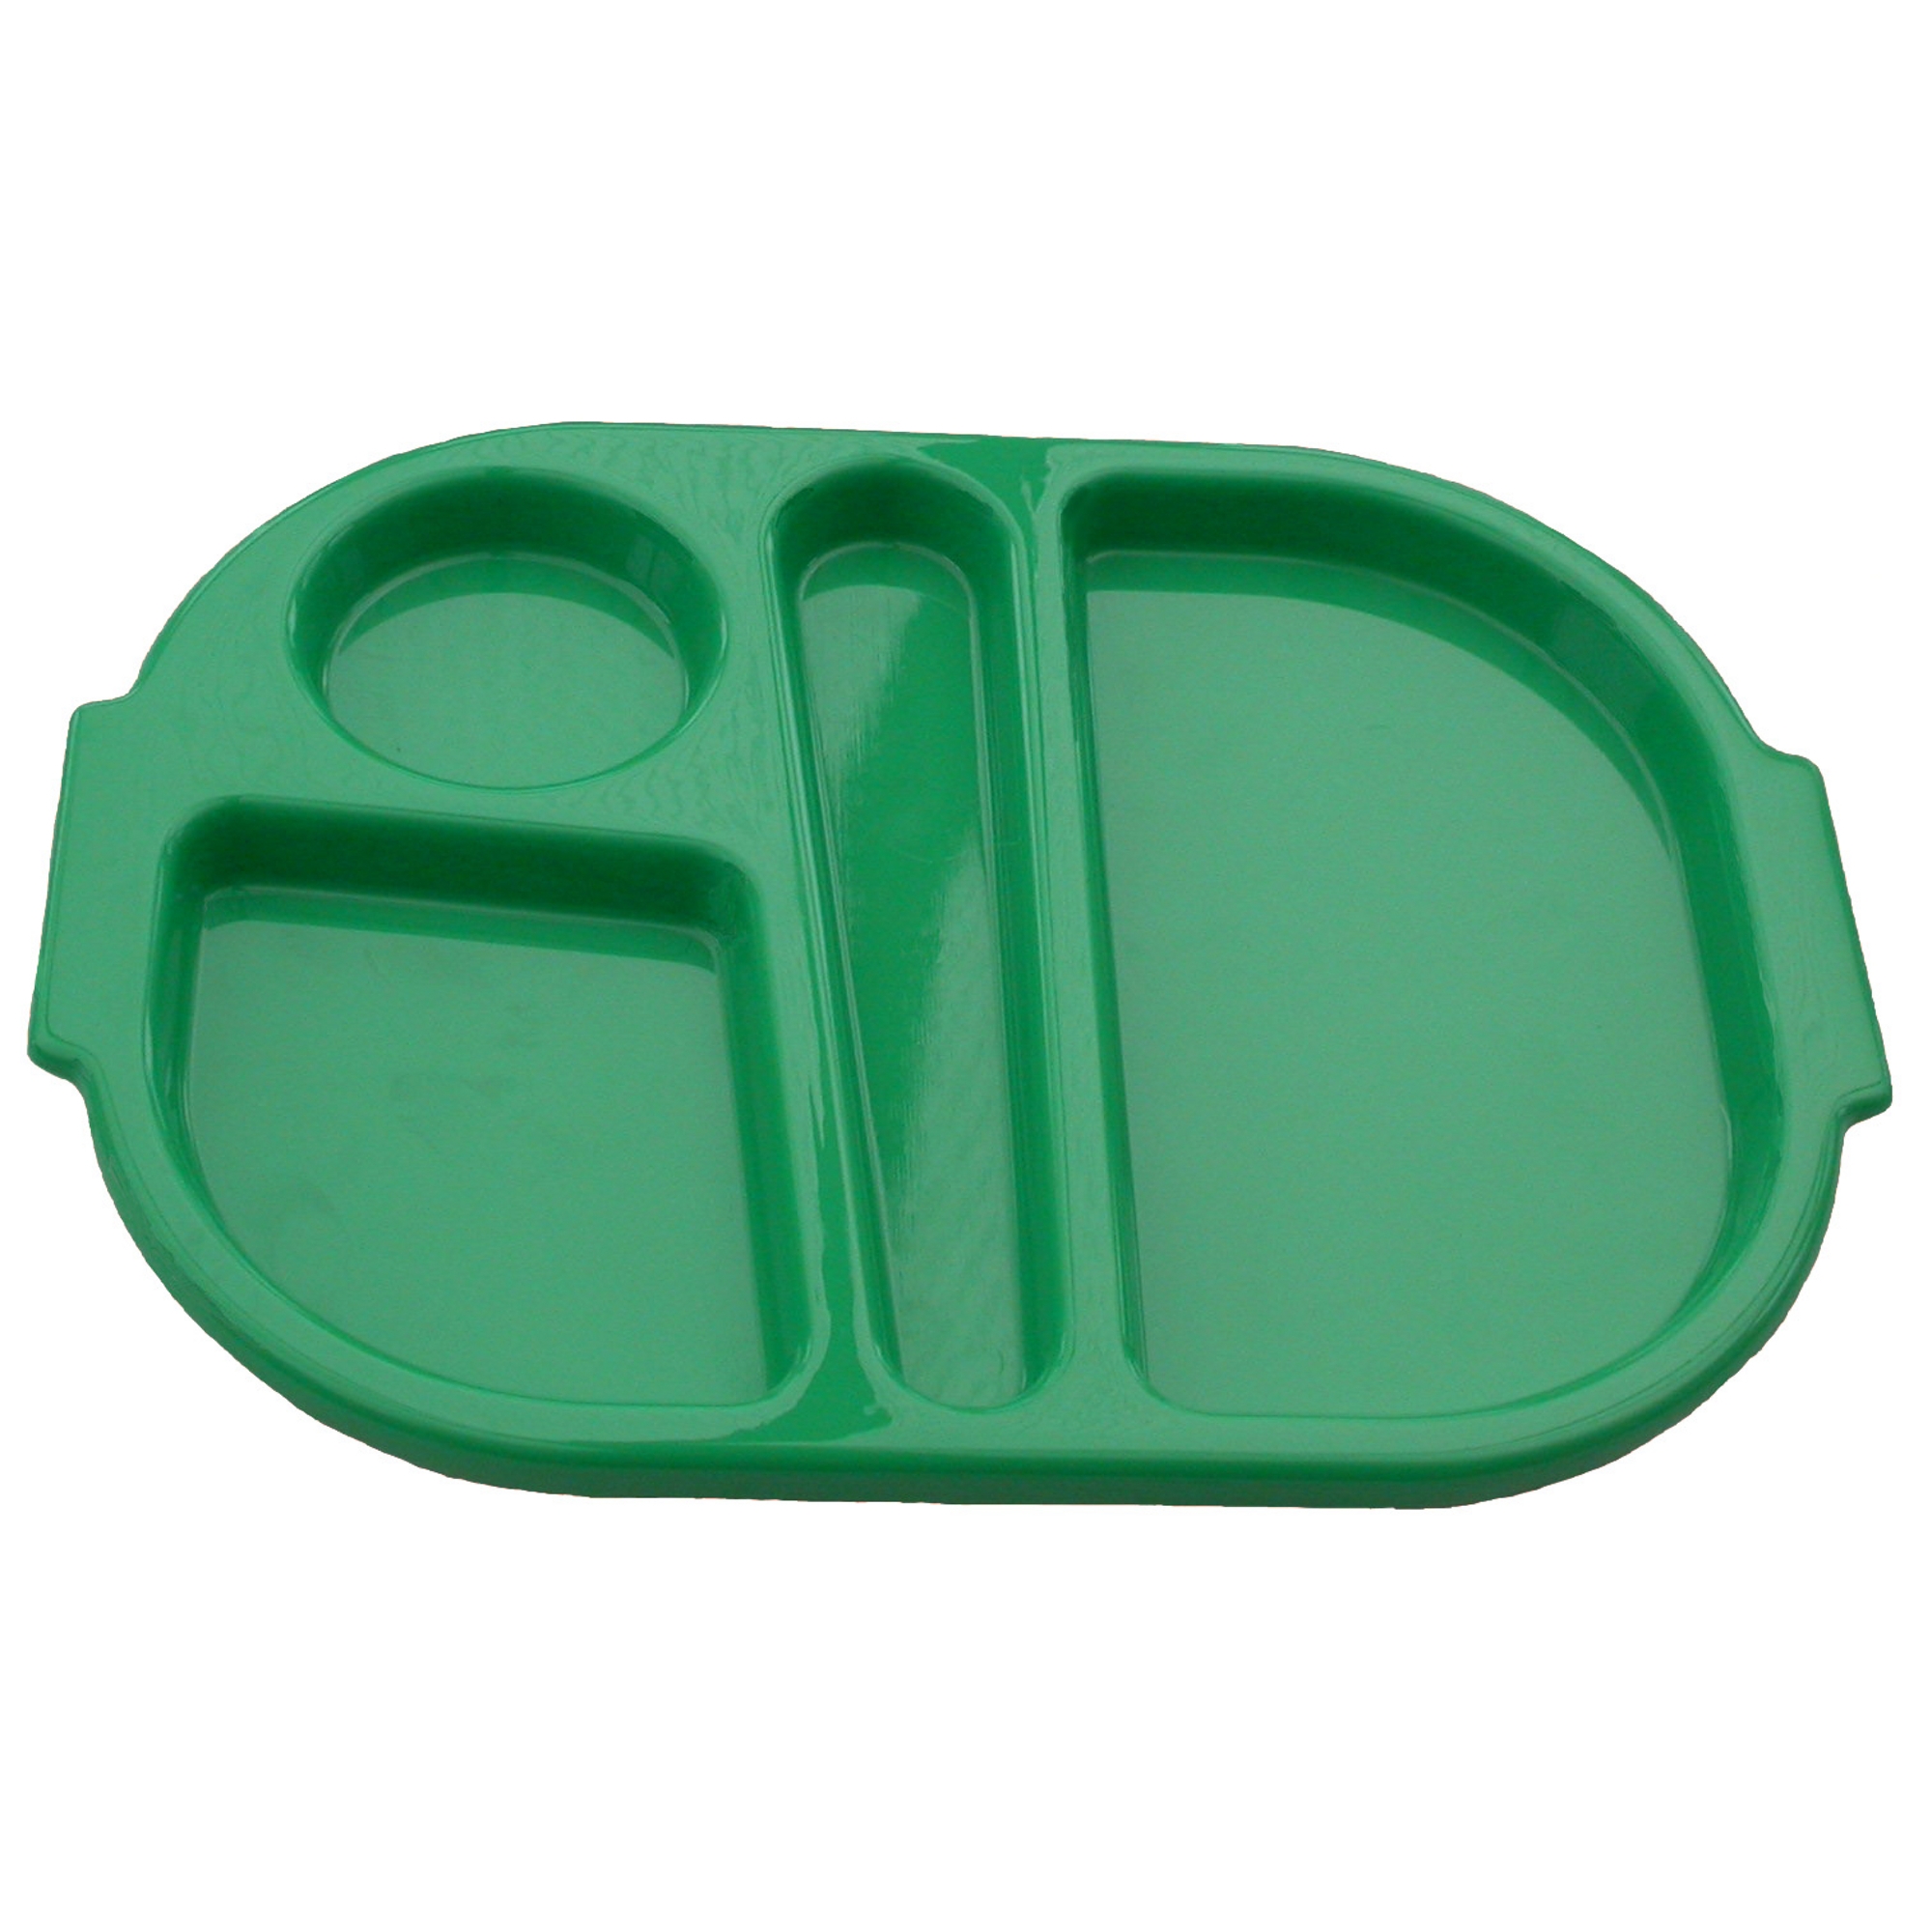 Meal Trays - Small - Green